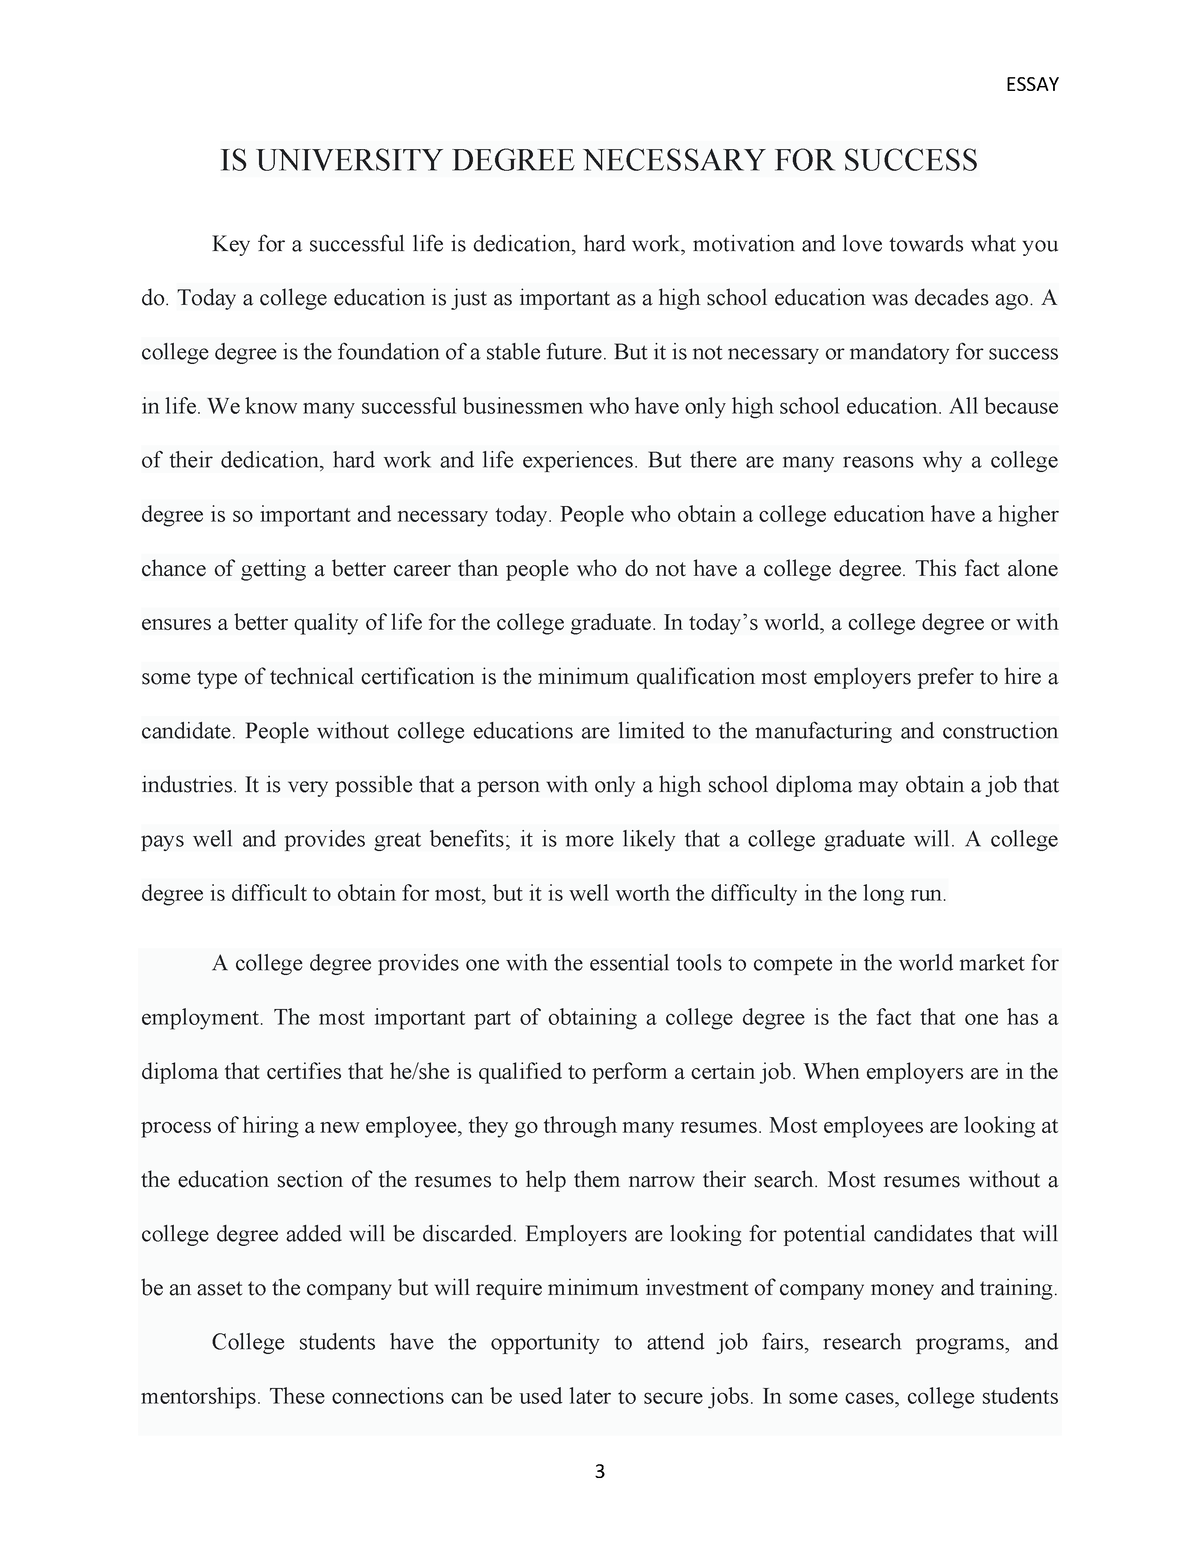 is university degree necessary for success essay